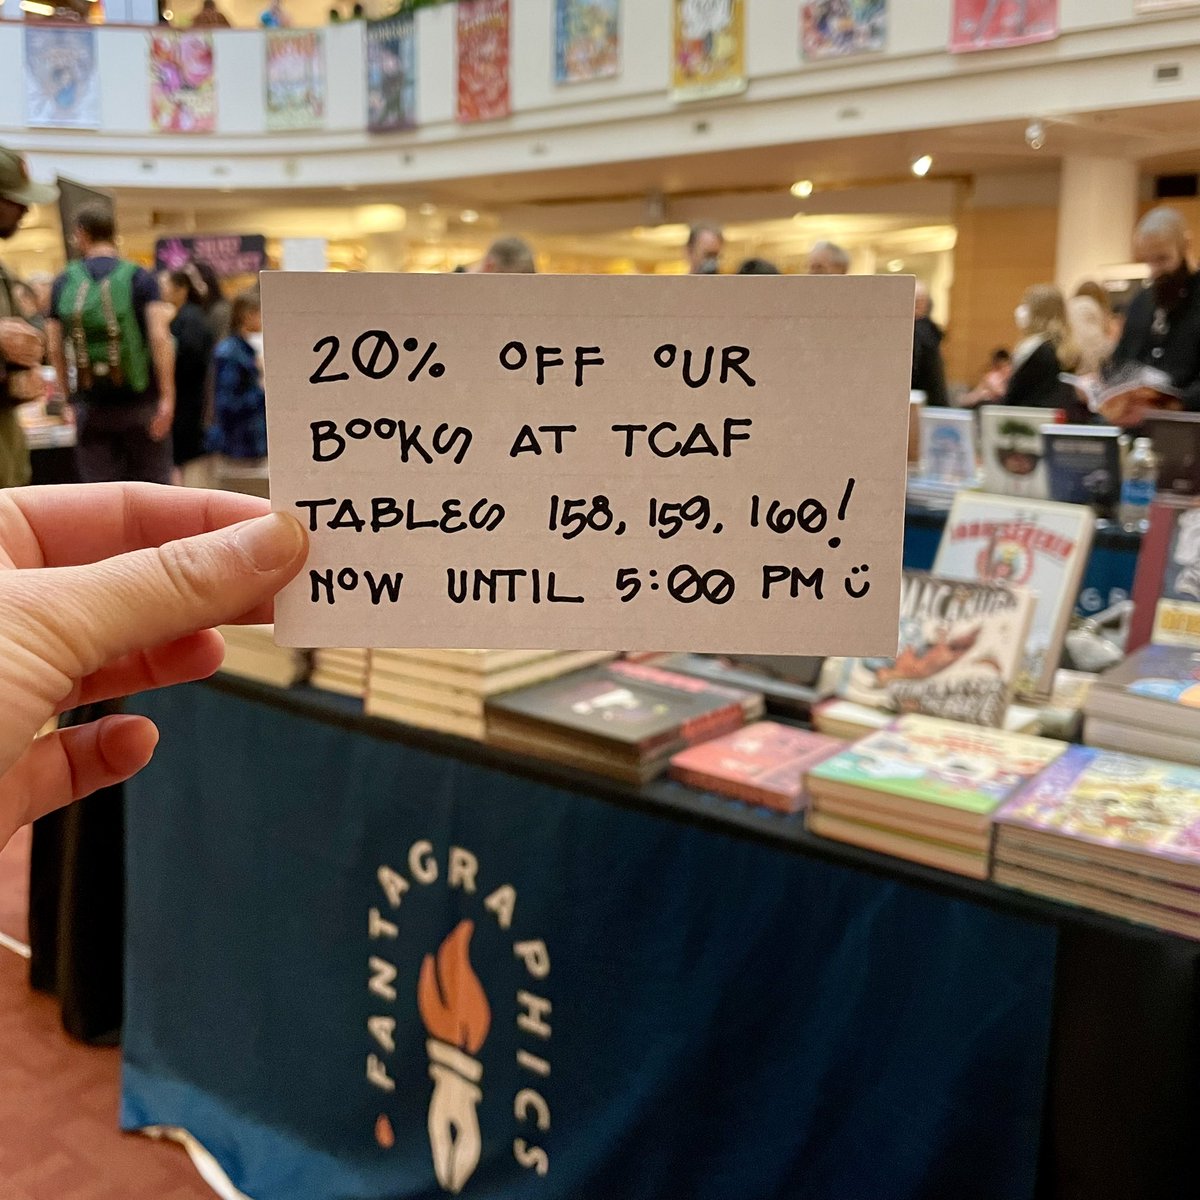 TCAF show special: we’re offering 20% off the books at our tables 158, 159, 160 until 5:00 pm today—stop on by and stock up!